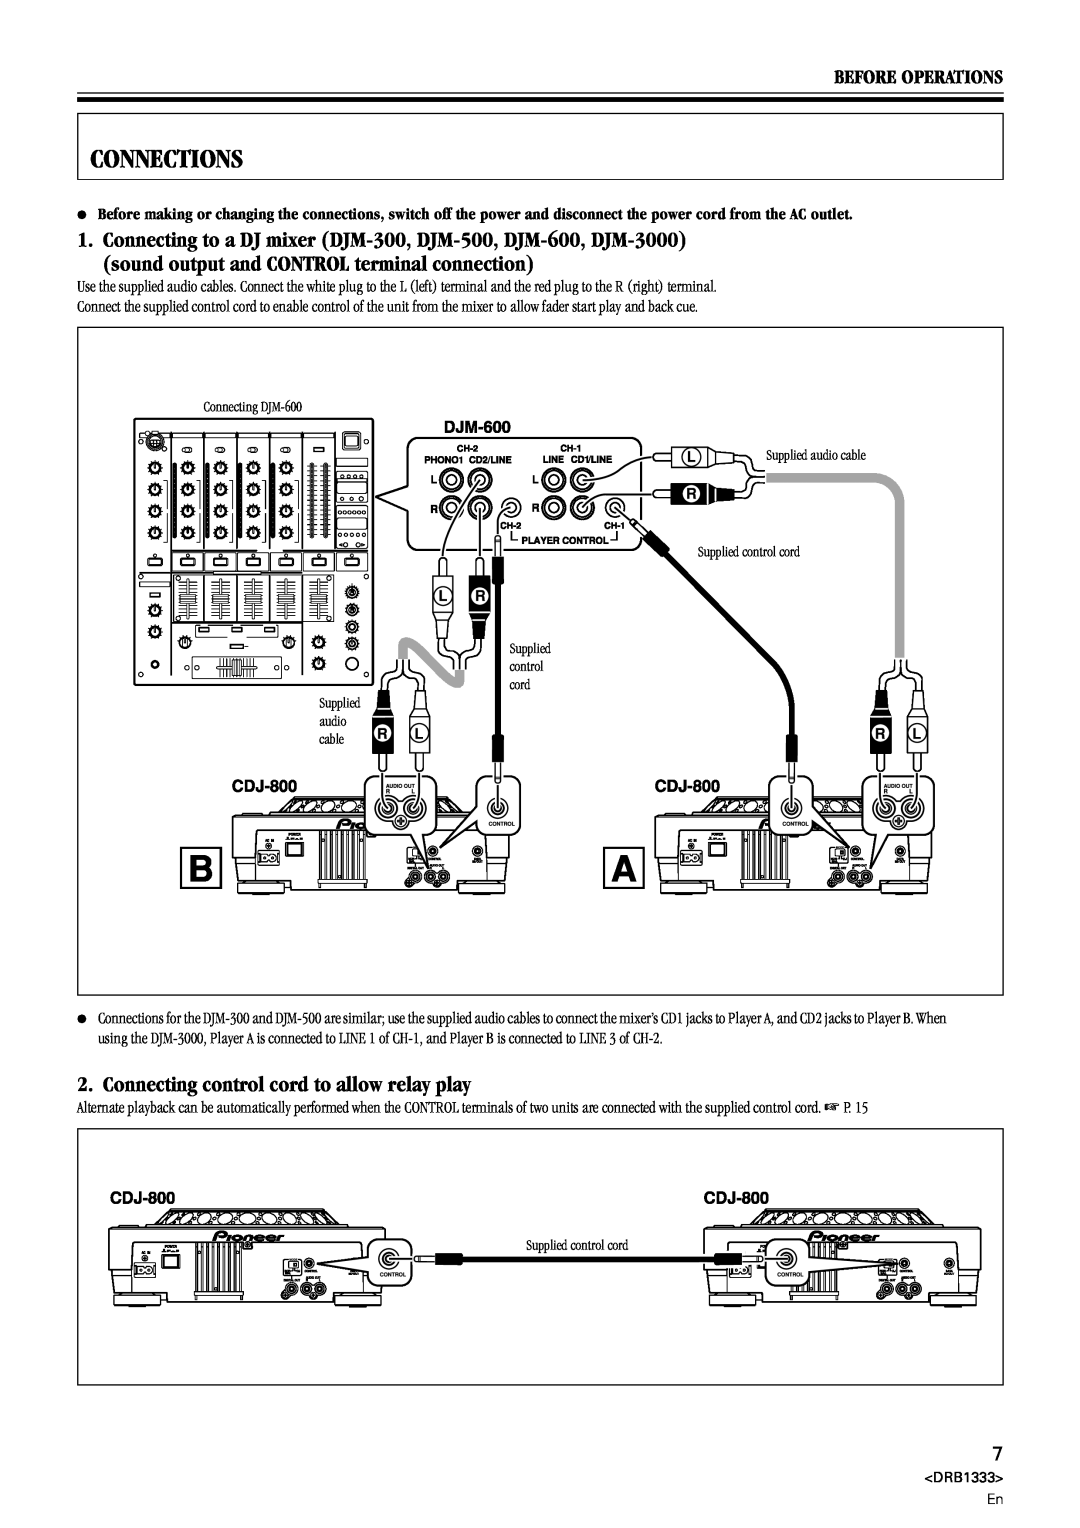 Pioneer CDJ-800 manual Connections, Connecting control cord to allow relay play, Before Operations 